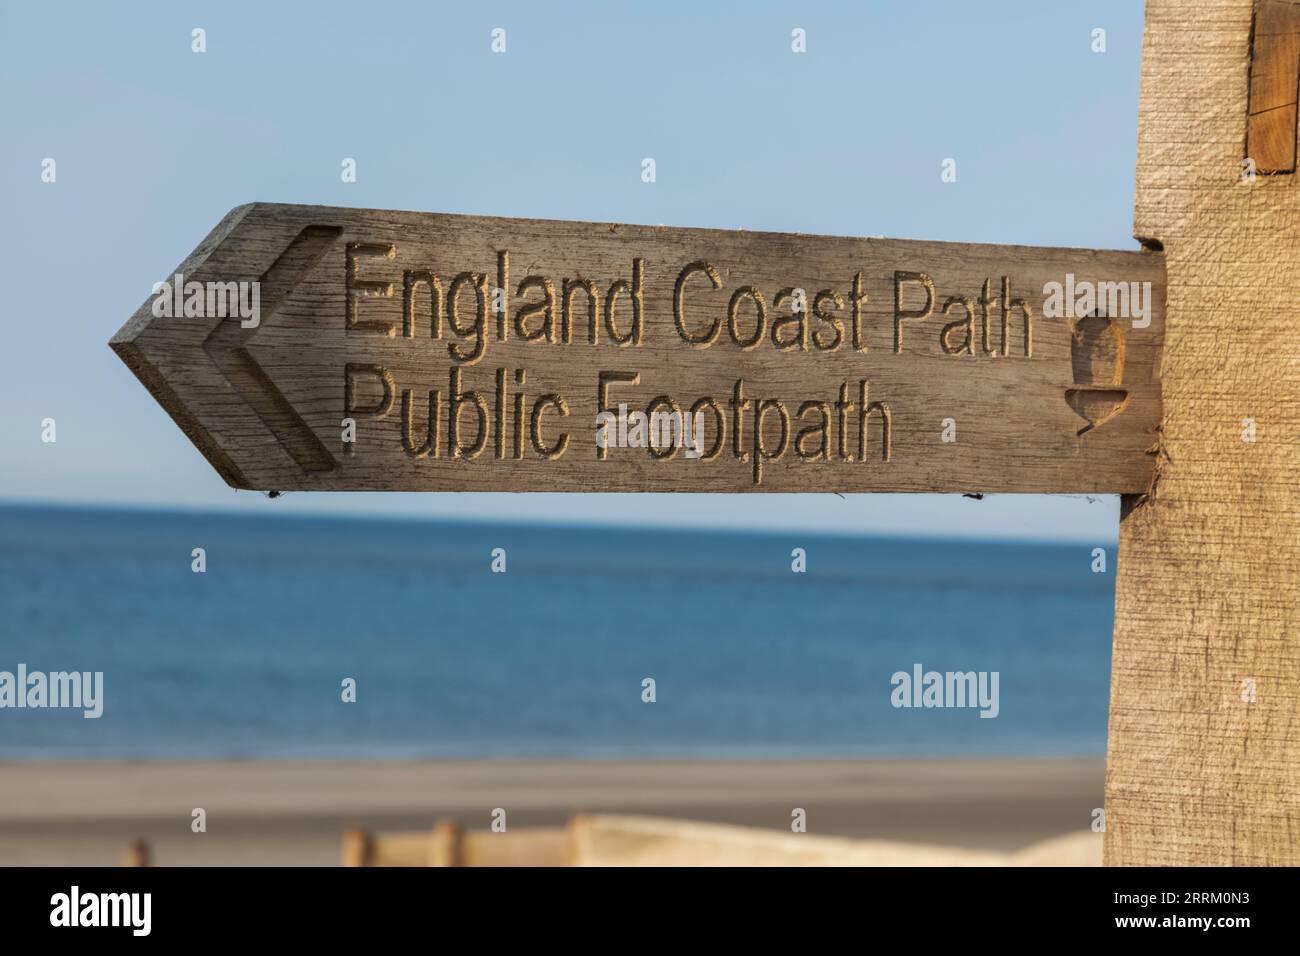 England, Sussex, West Sussex, Selsey, Selsey Bill, England Coast Path Public Footpath Sign Stock Photo